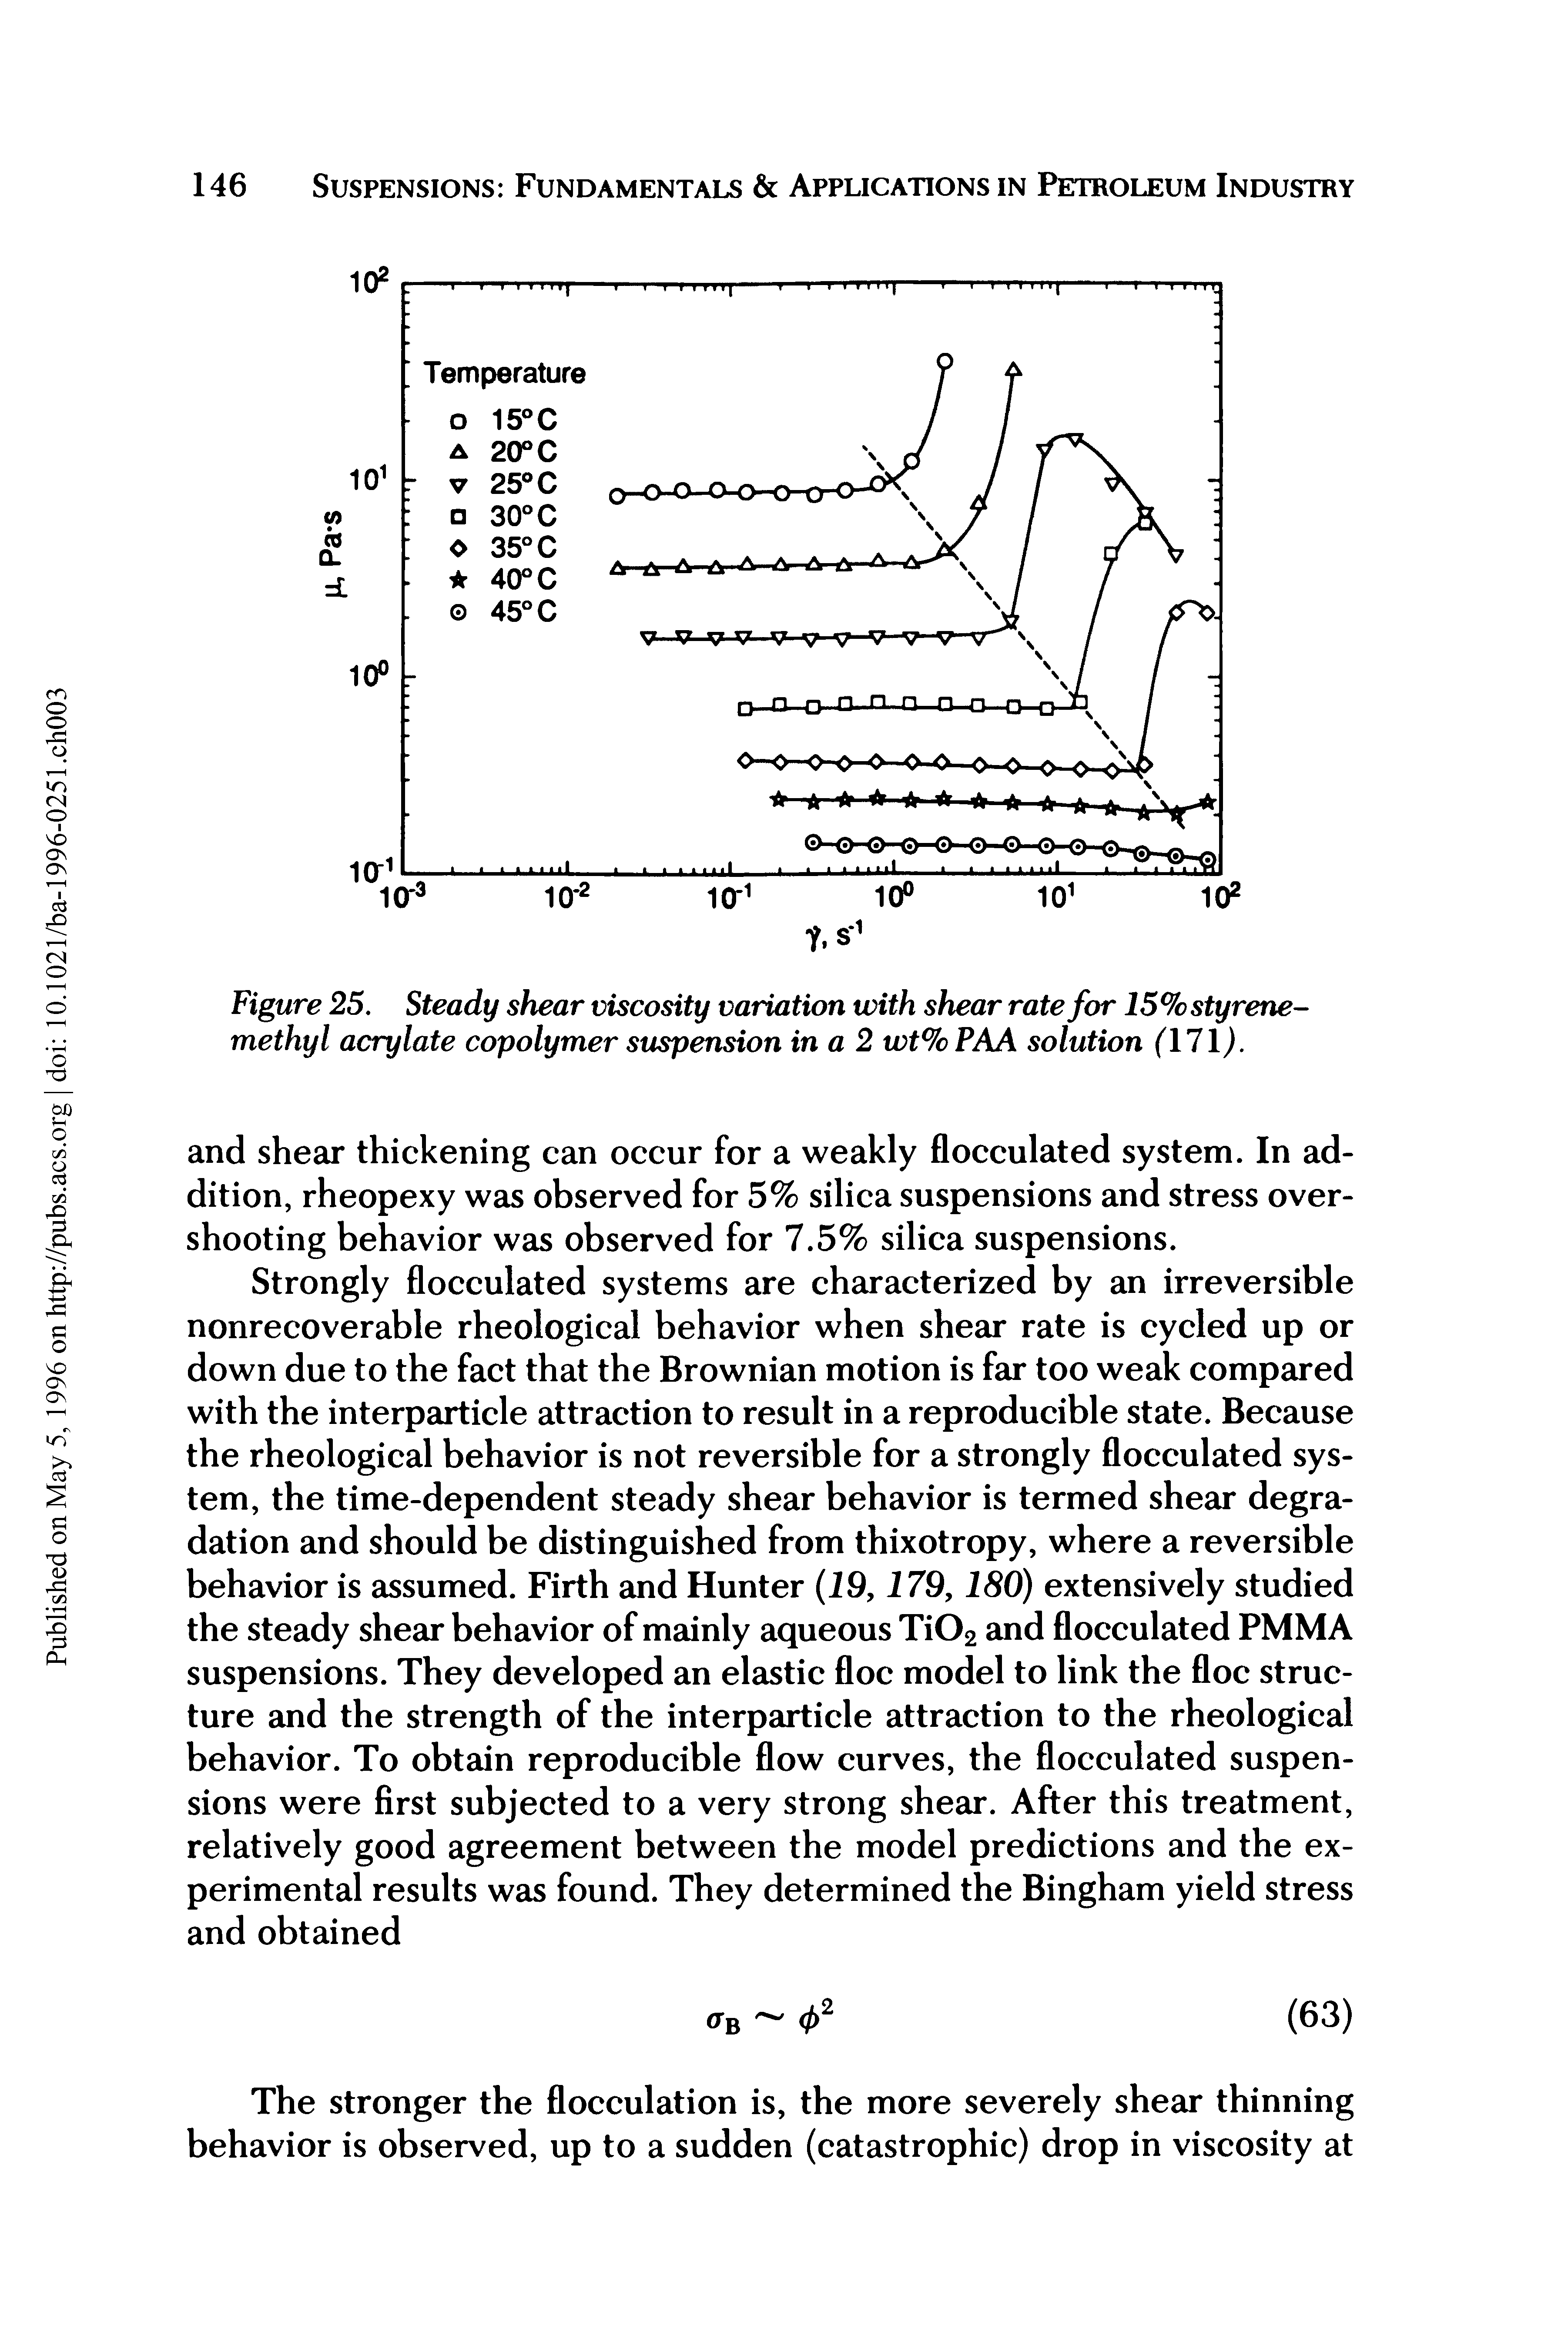 Figure 25. Steady shear viscosity variation with shear rate for 15% styrene-methyl acrylate copolymer suspension in a 2 wt% PAA solution (171).